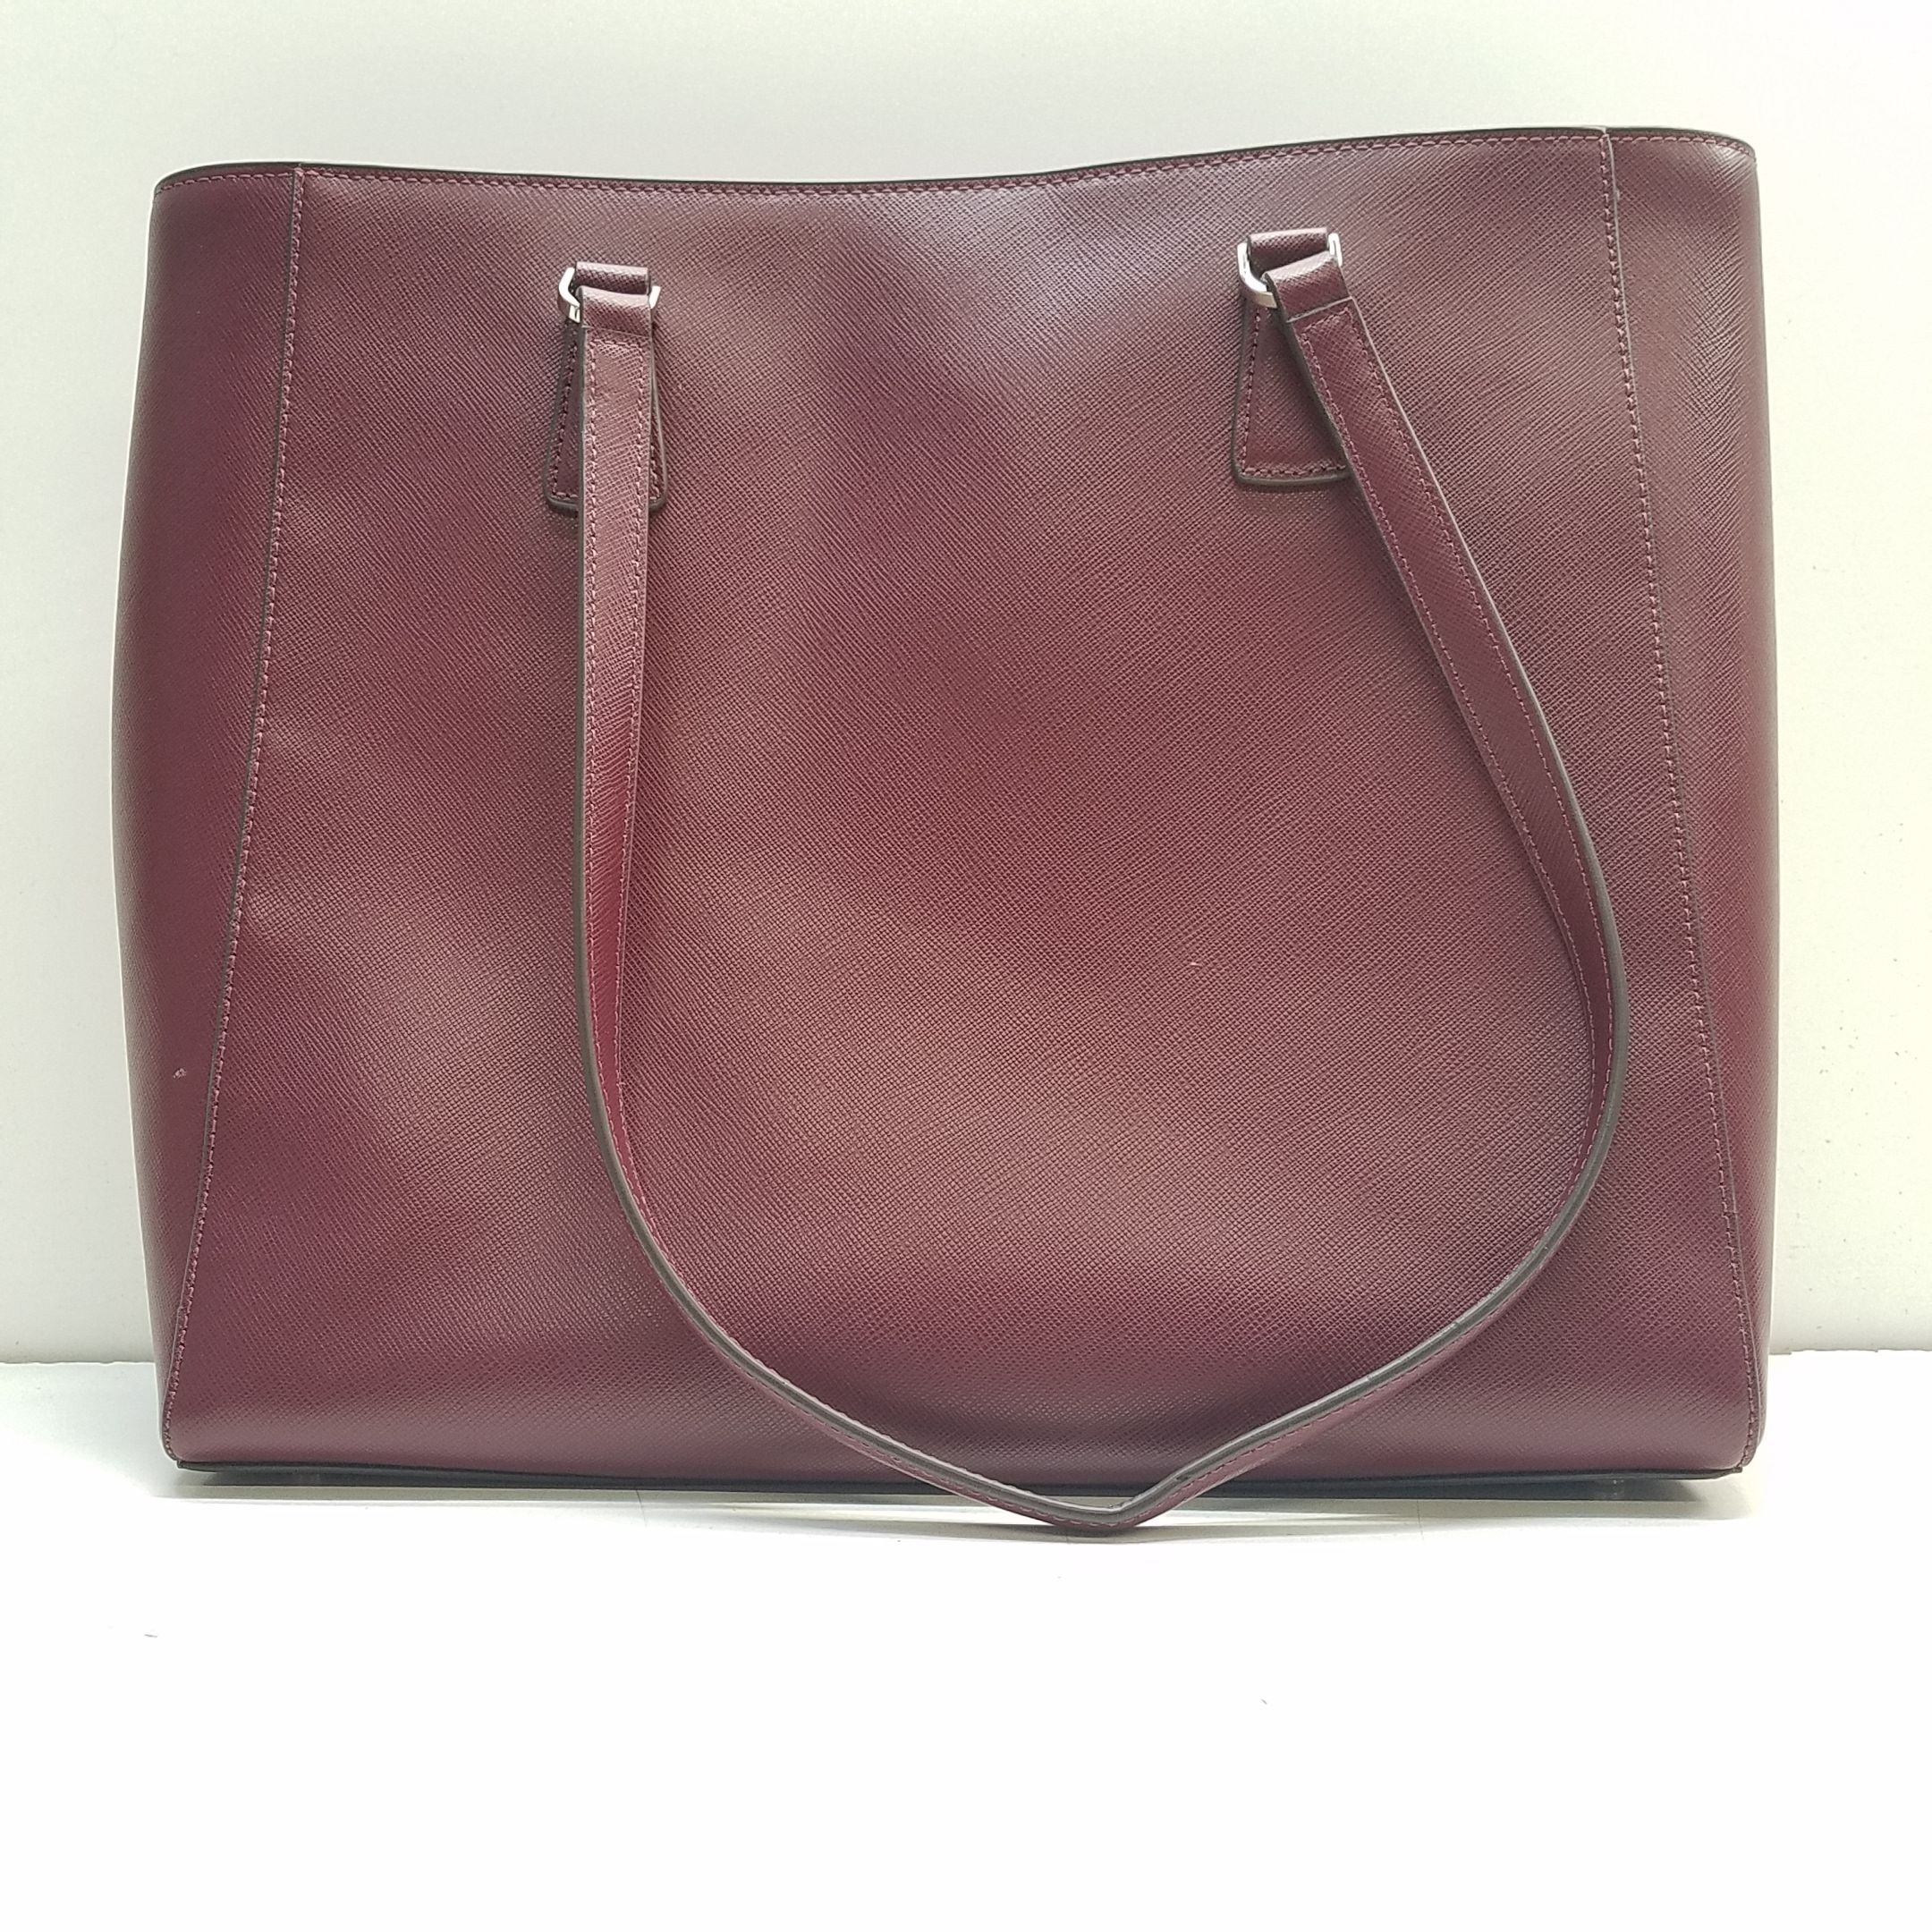 Kate Spade Monet Leather 3 Compartment Tote Handbag Rose and Burgundy Purse  | eBay